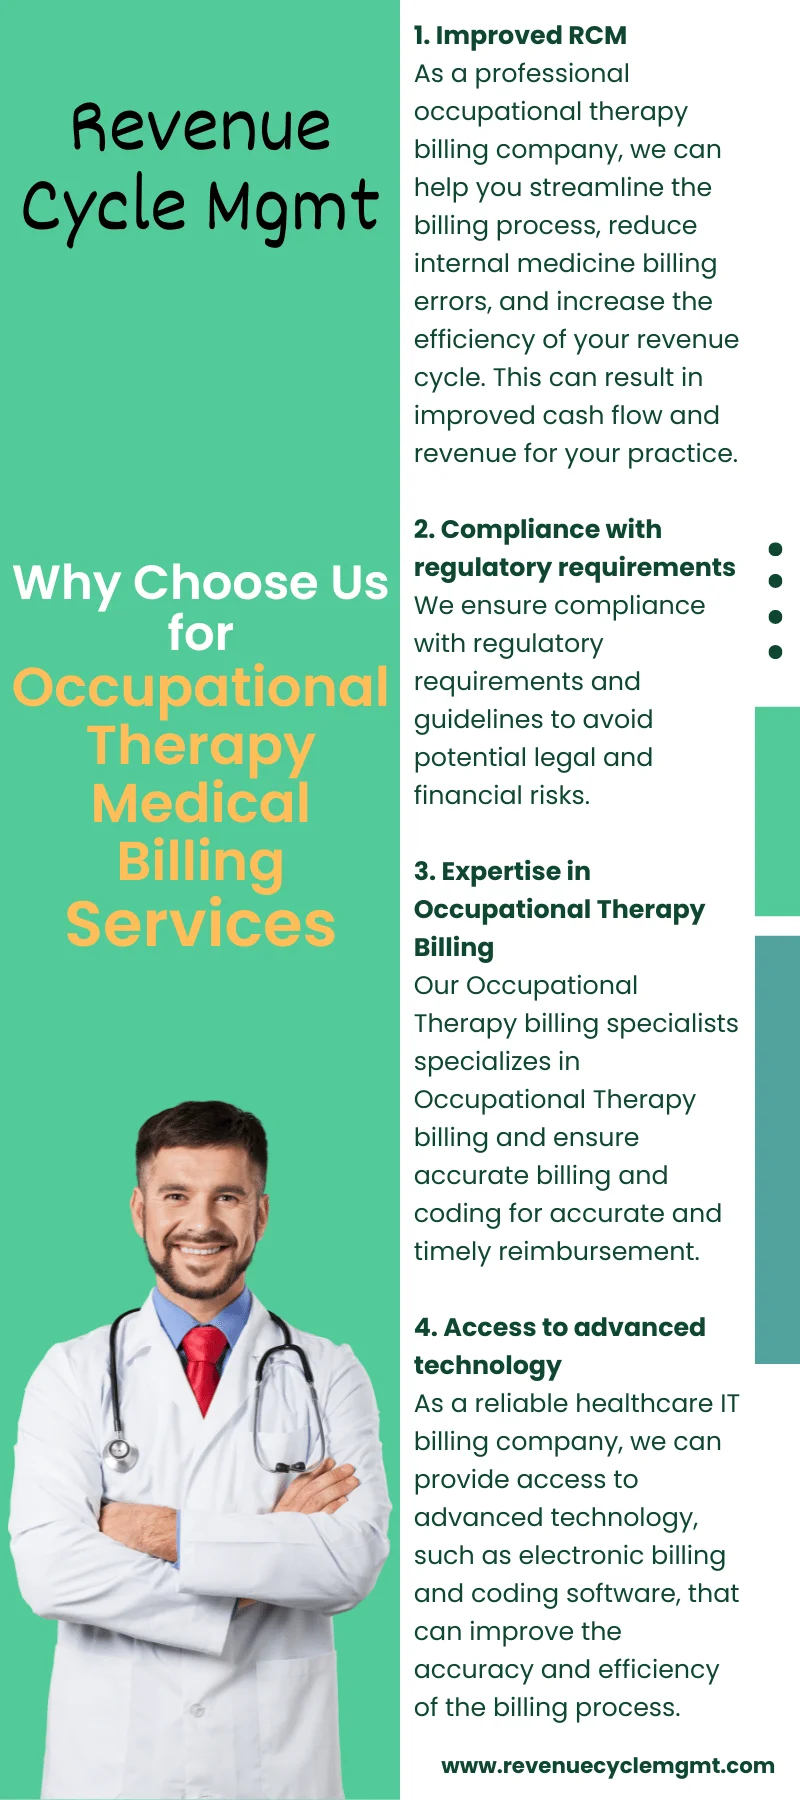 Why Choose Us for Occupational Therapy Medical Billing Services